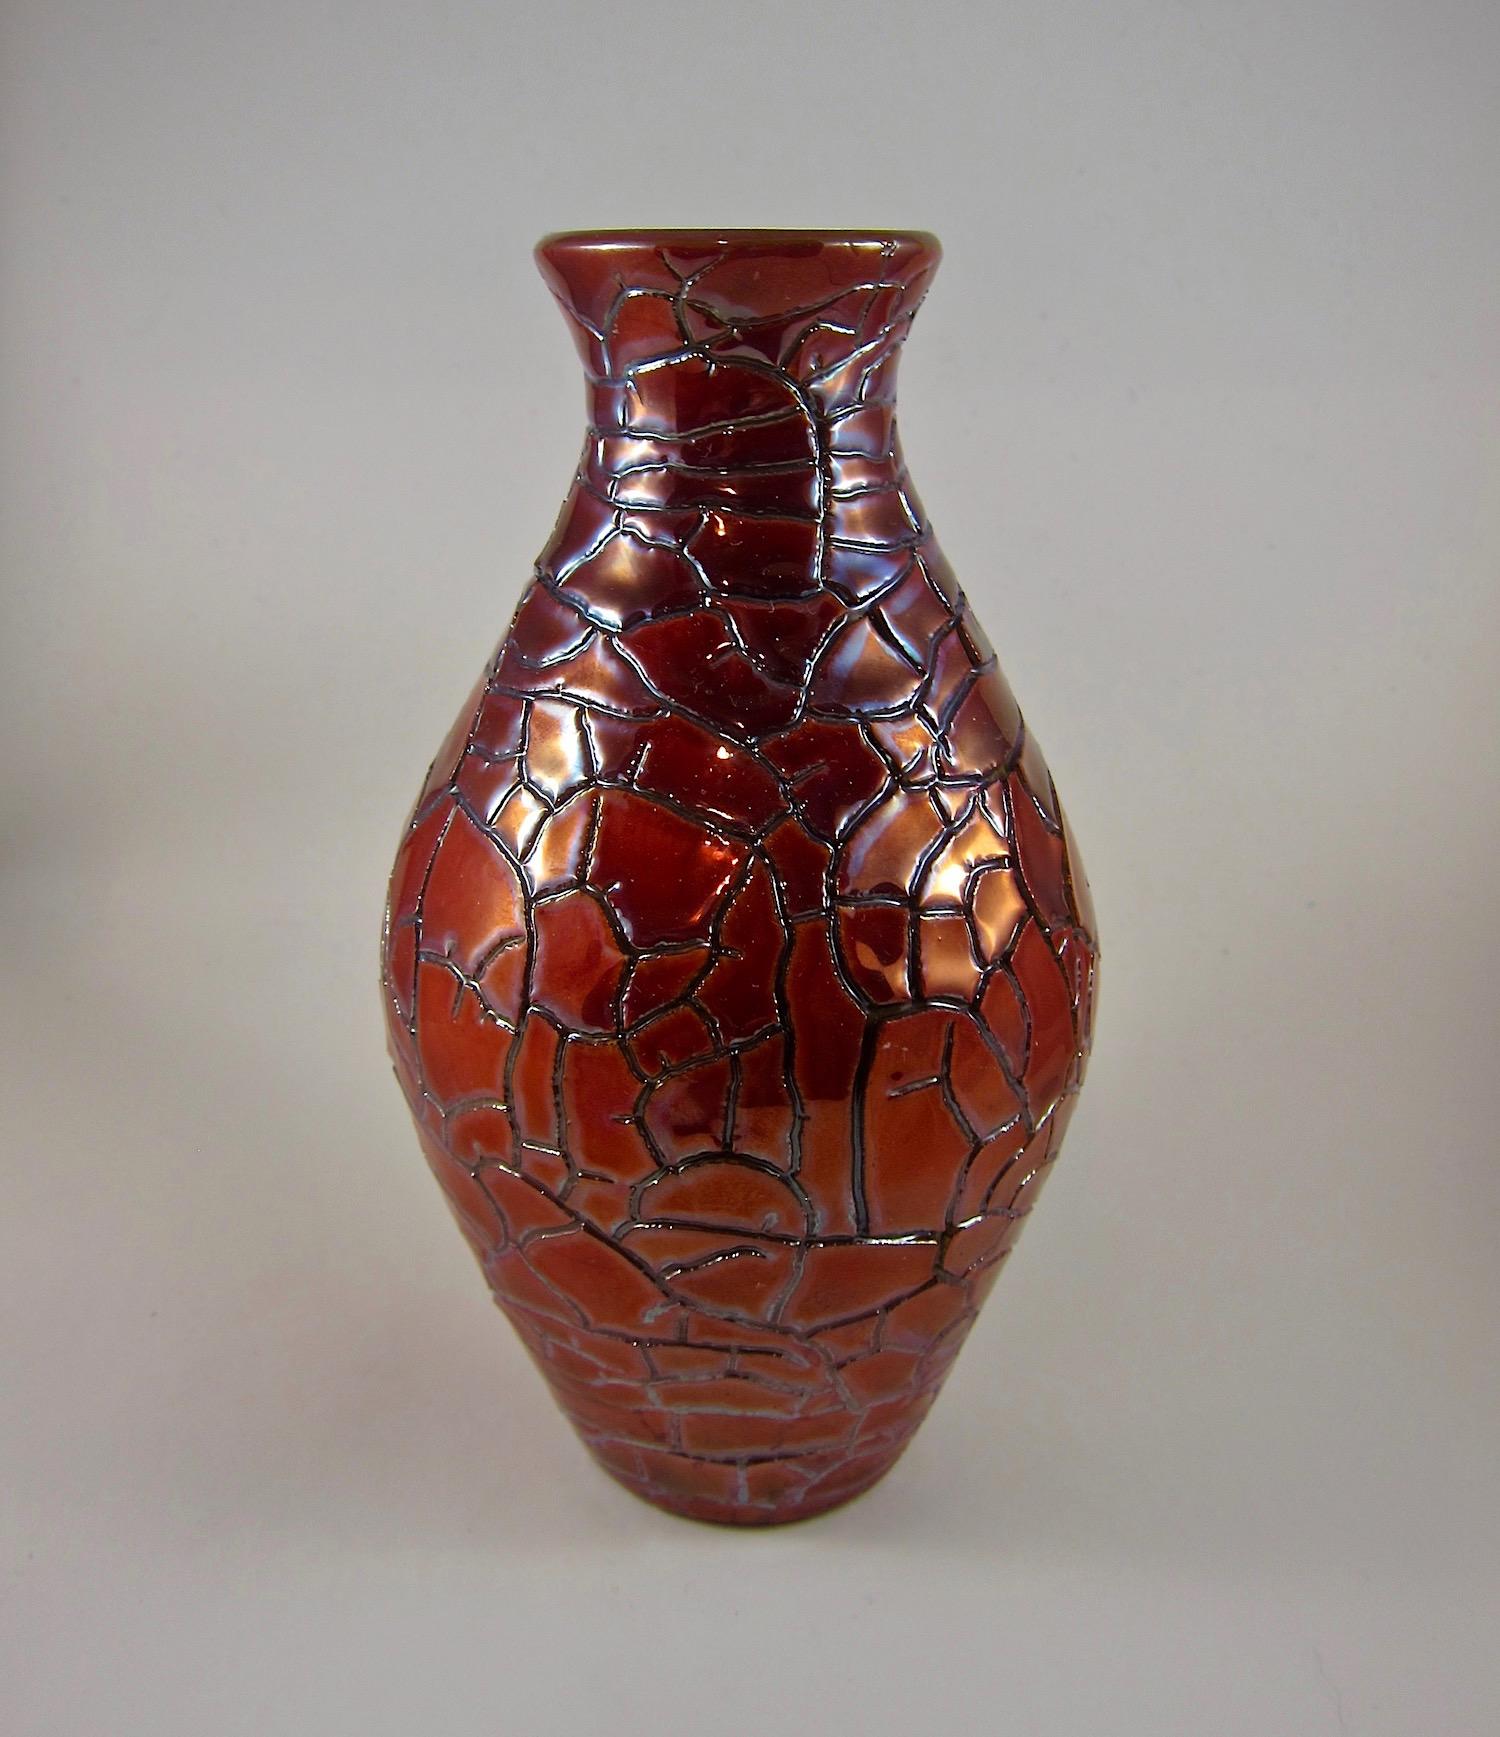 An Art Deco style porcelain faience posy vase produced in Hungary by Zsolnay of Pecs and dating to the late 1950s - early 1960s. This vintage vessel is decorated with Zsolnay's signature eosin glaze in a rich and deep red. The glaze has a lively,